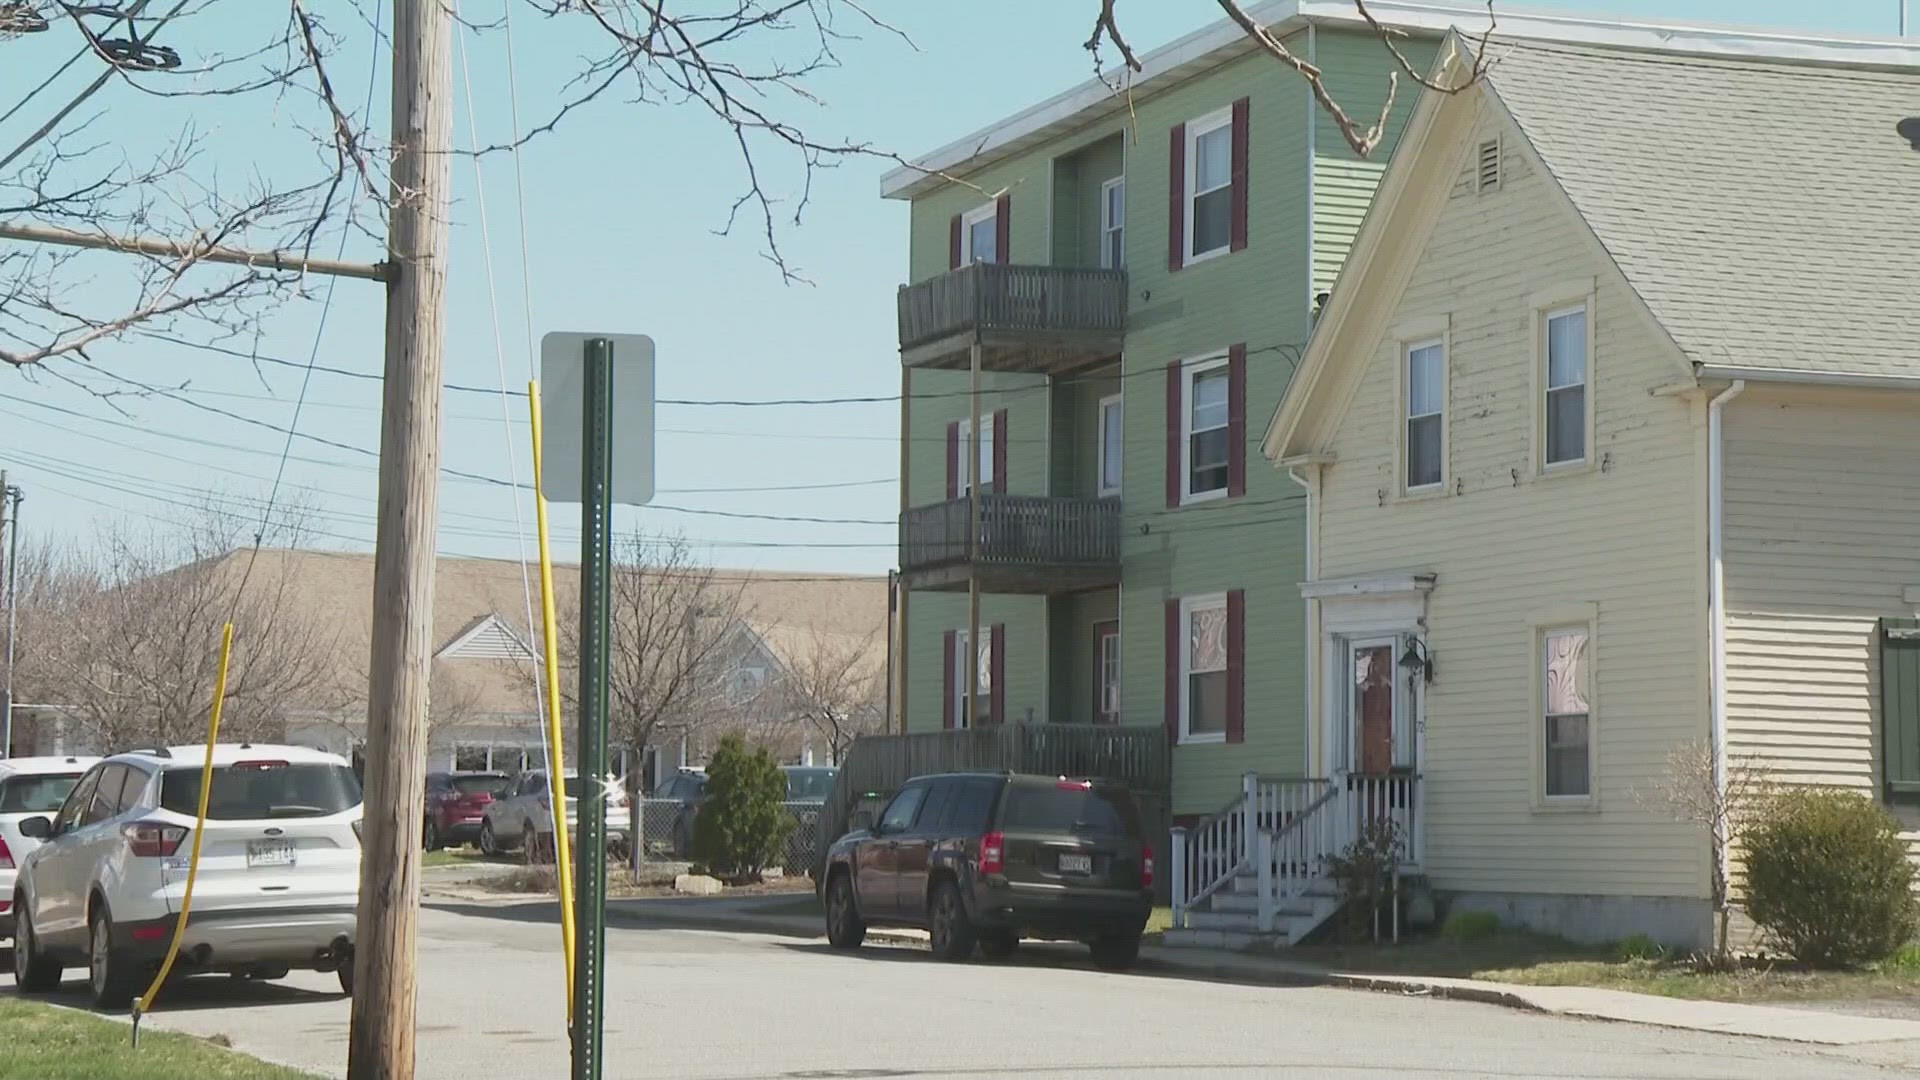 Police are investigating a shooting at a home on B Street in South Portland, authorities say.